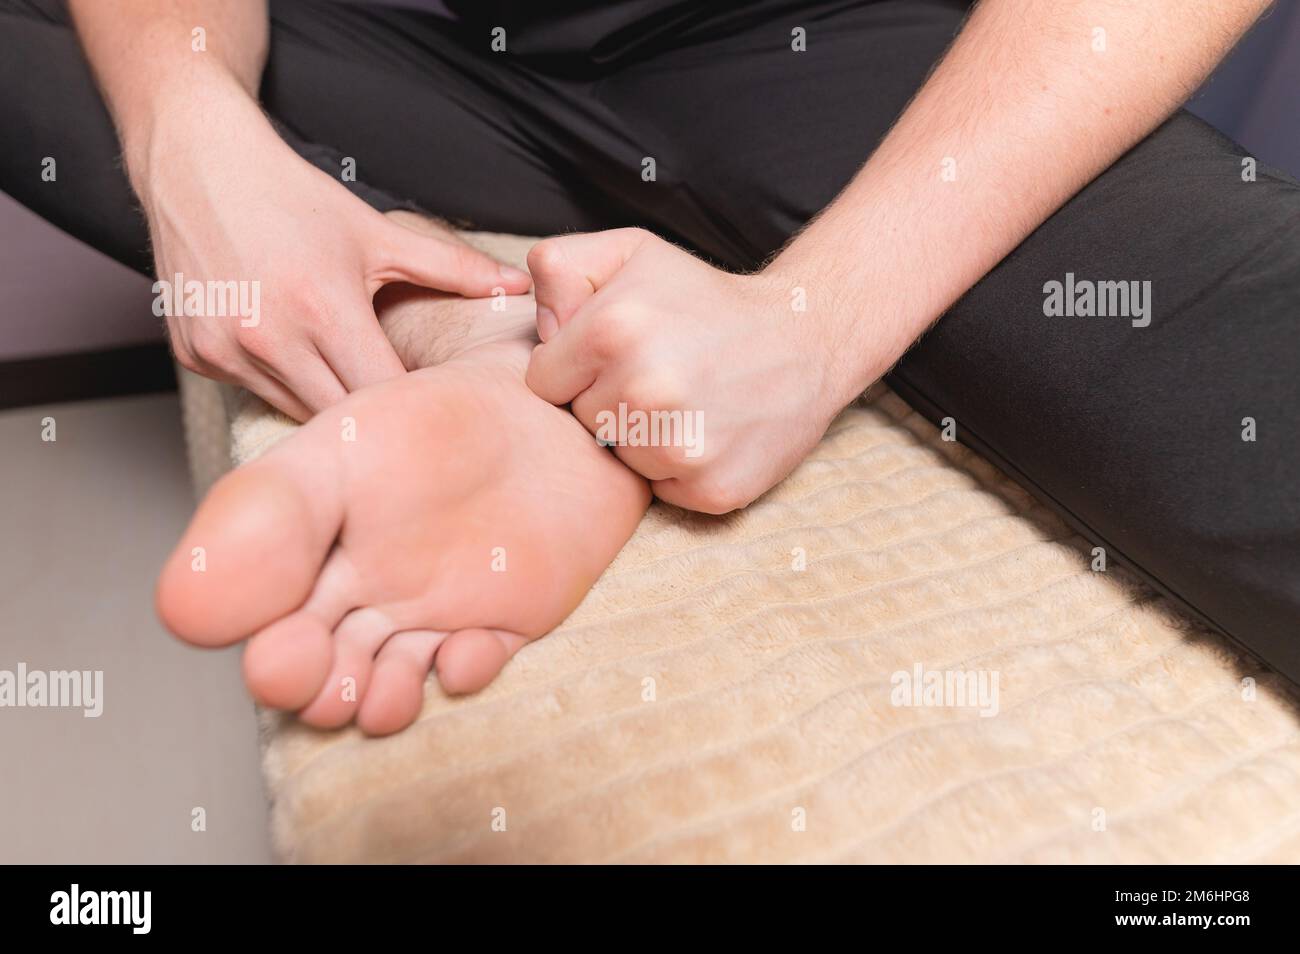 Close-up of a male masseur sitting on a bunk makes himself a healing restorative foot massage Stock Photo